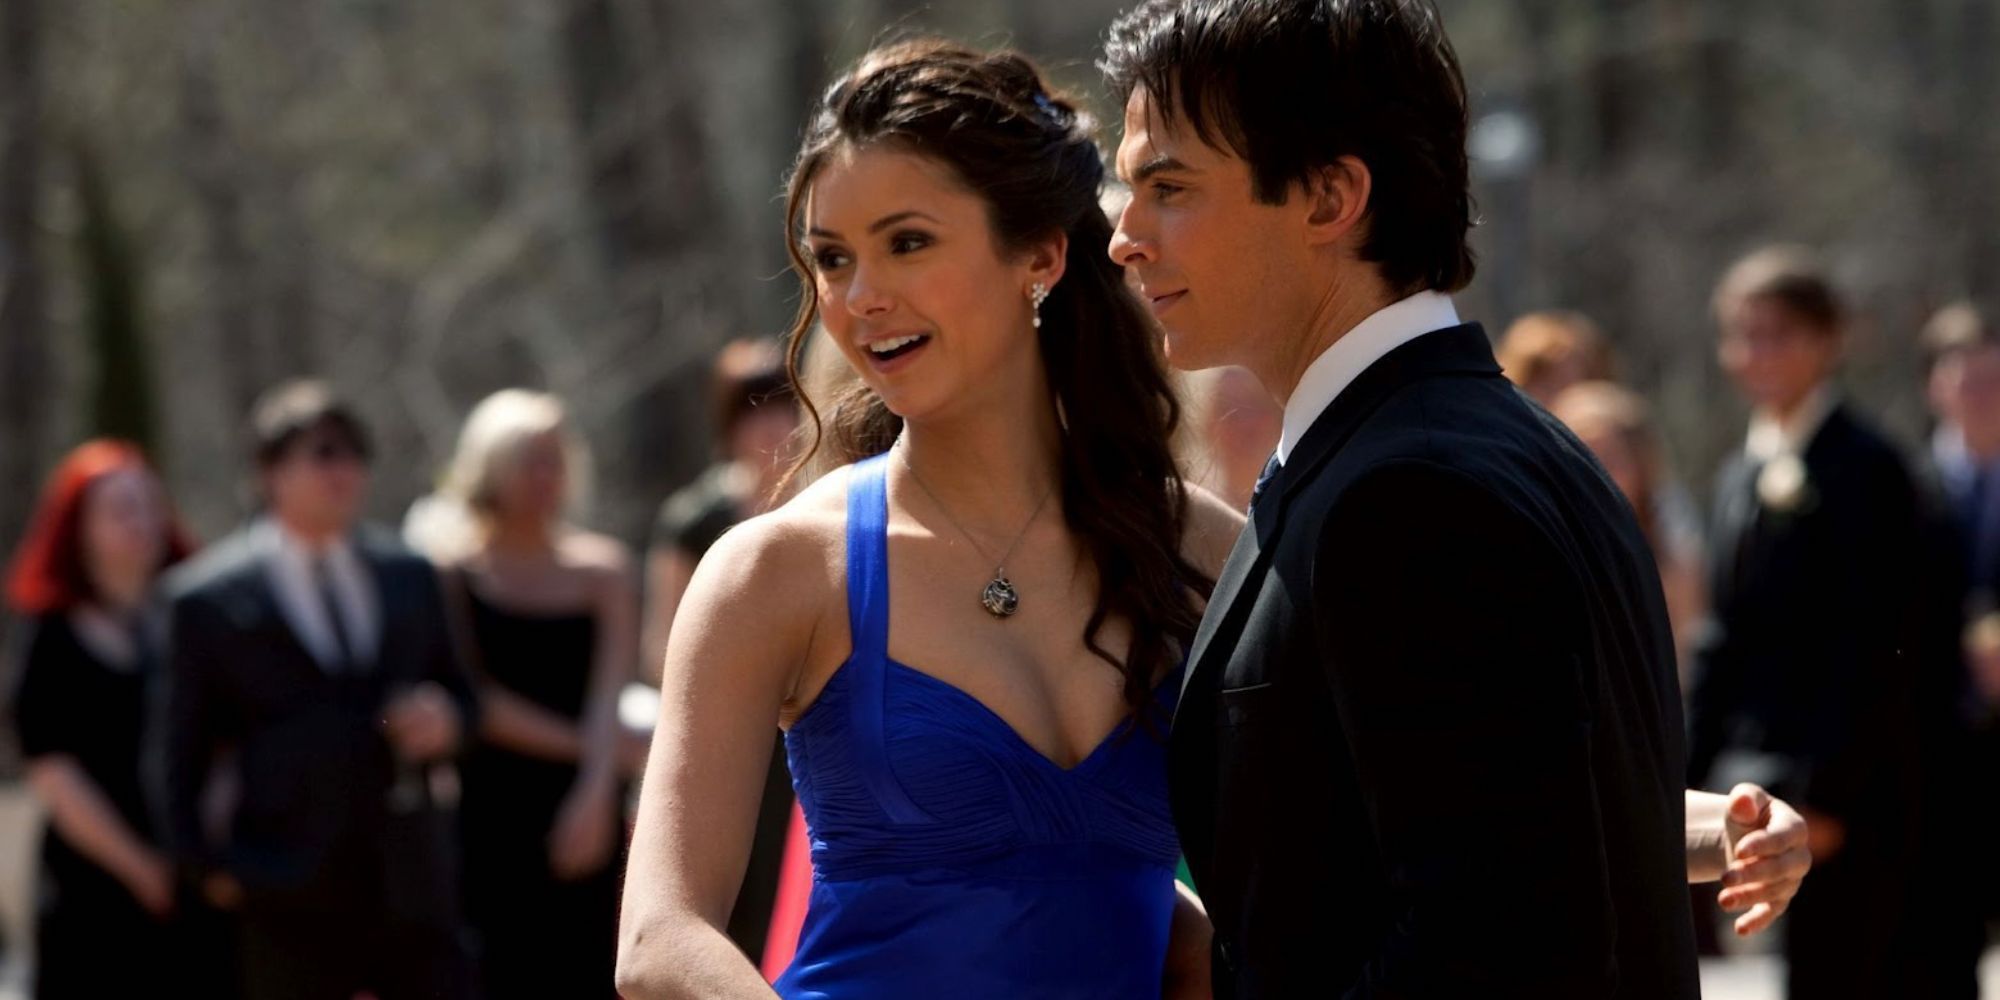 Elena and Damon laughing while dancing together in Miss Mystic Falls in The Vampire Diaries